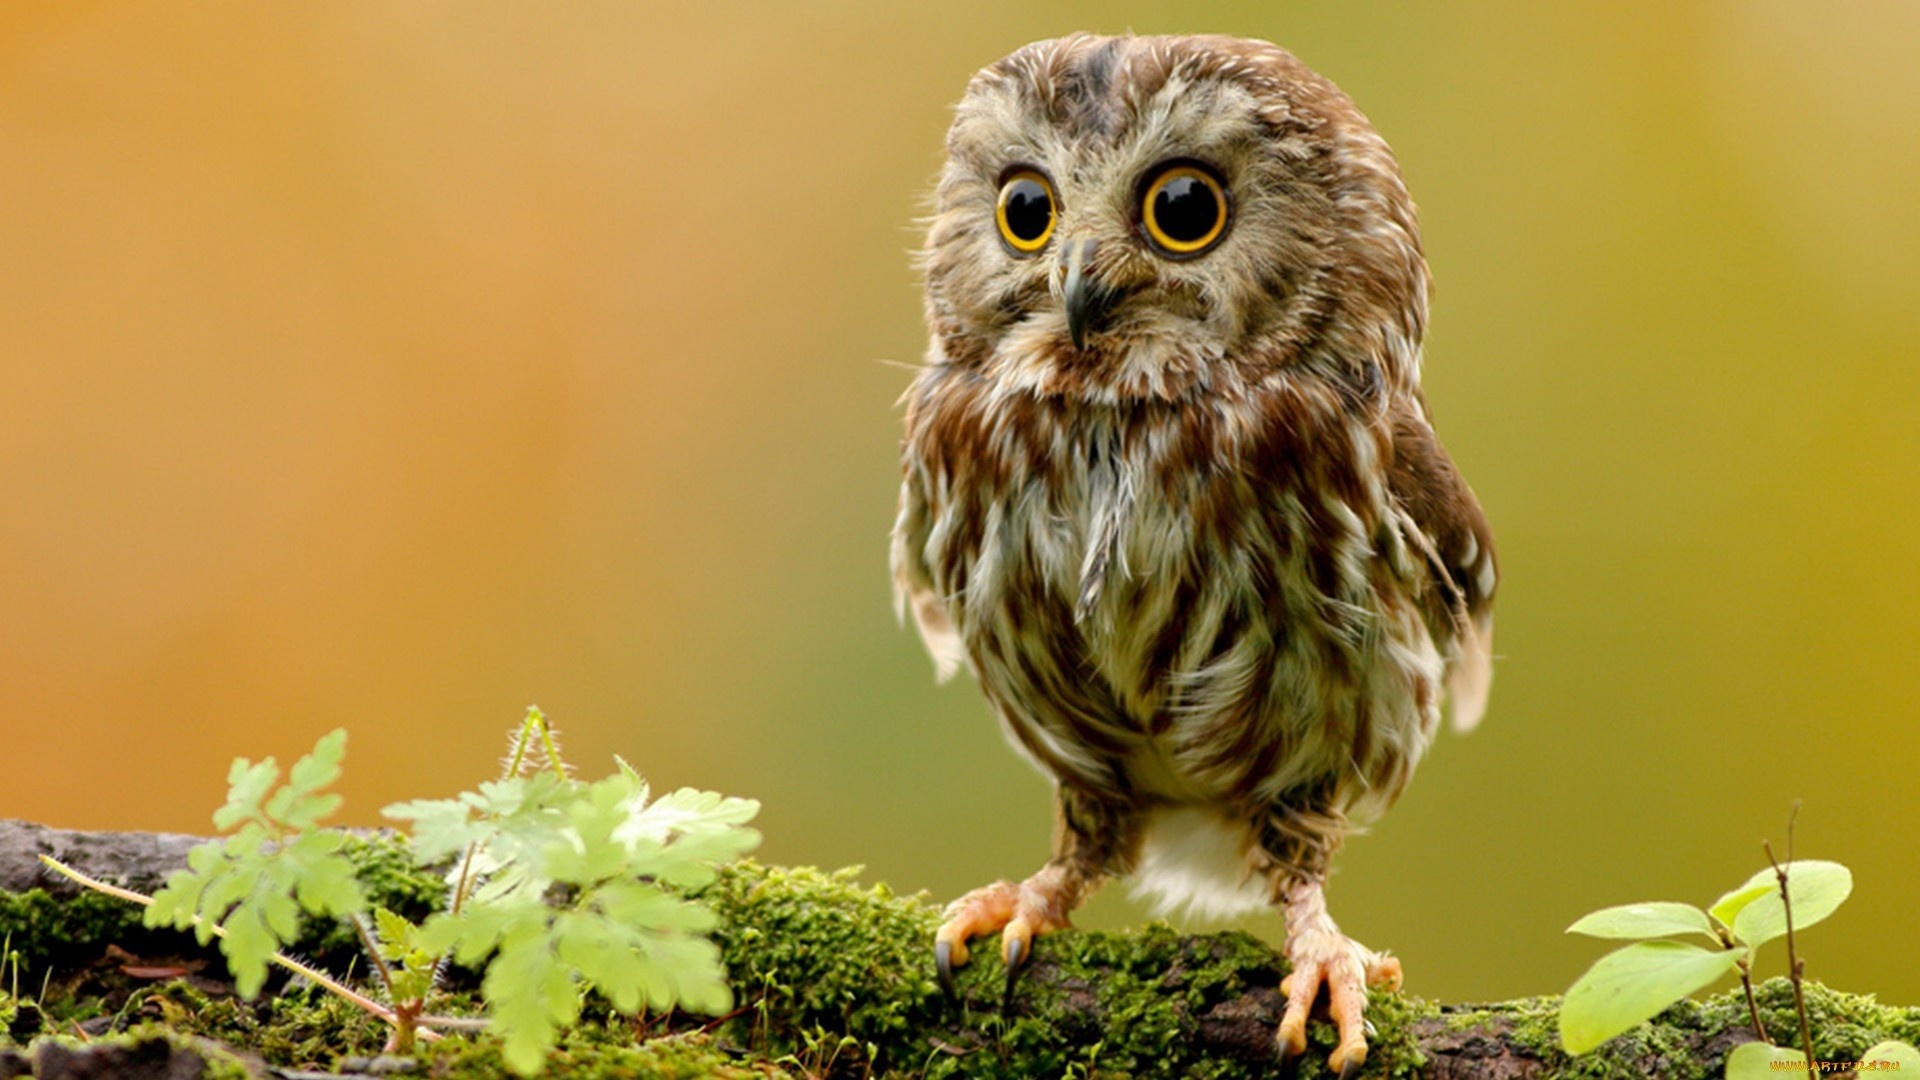 Selection Of Image Owl In HD Quality